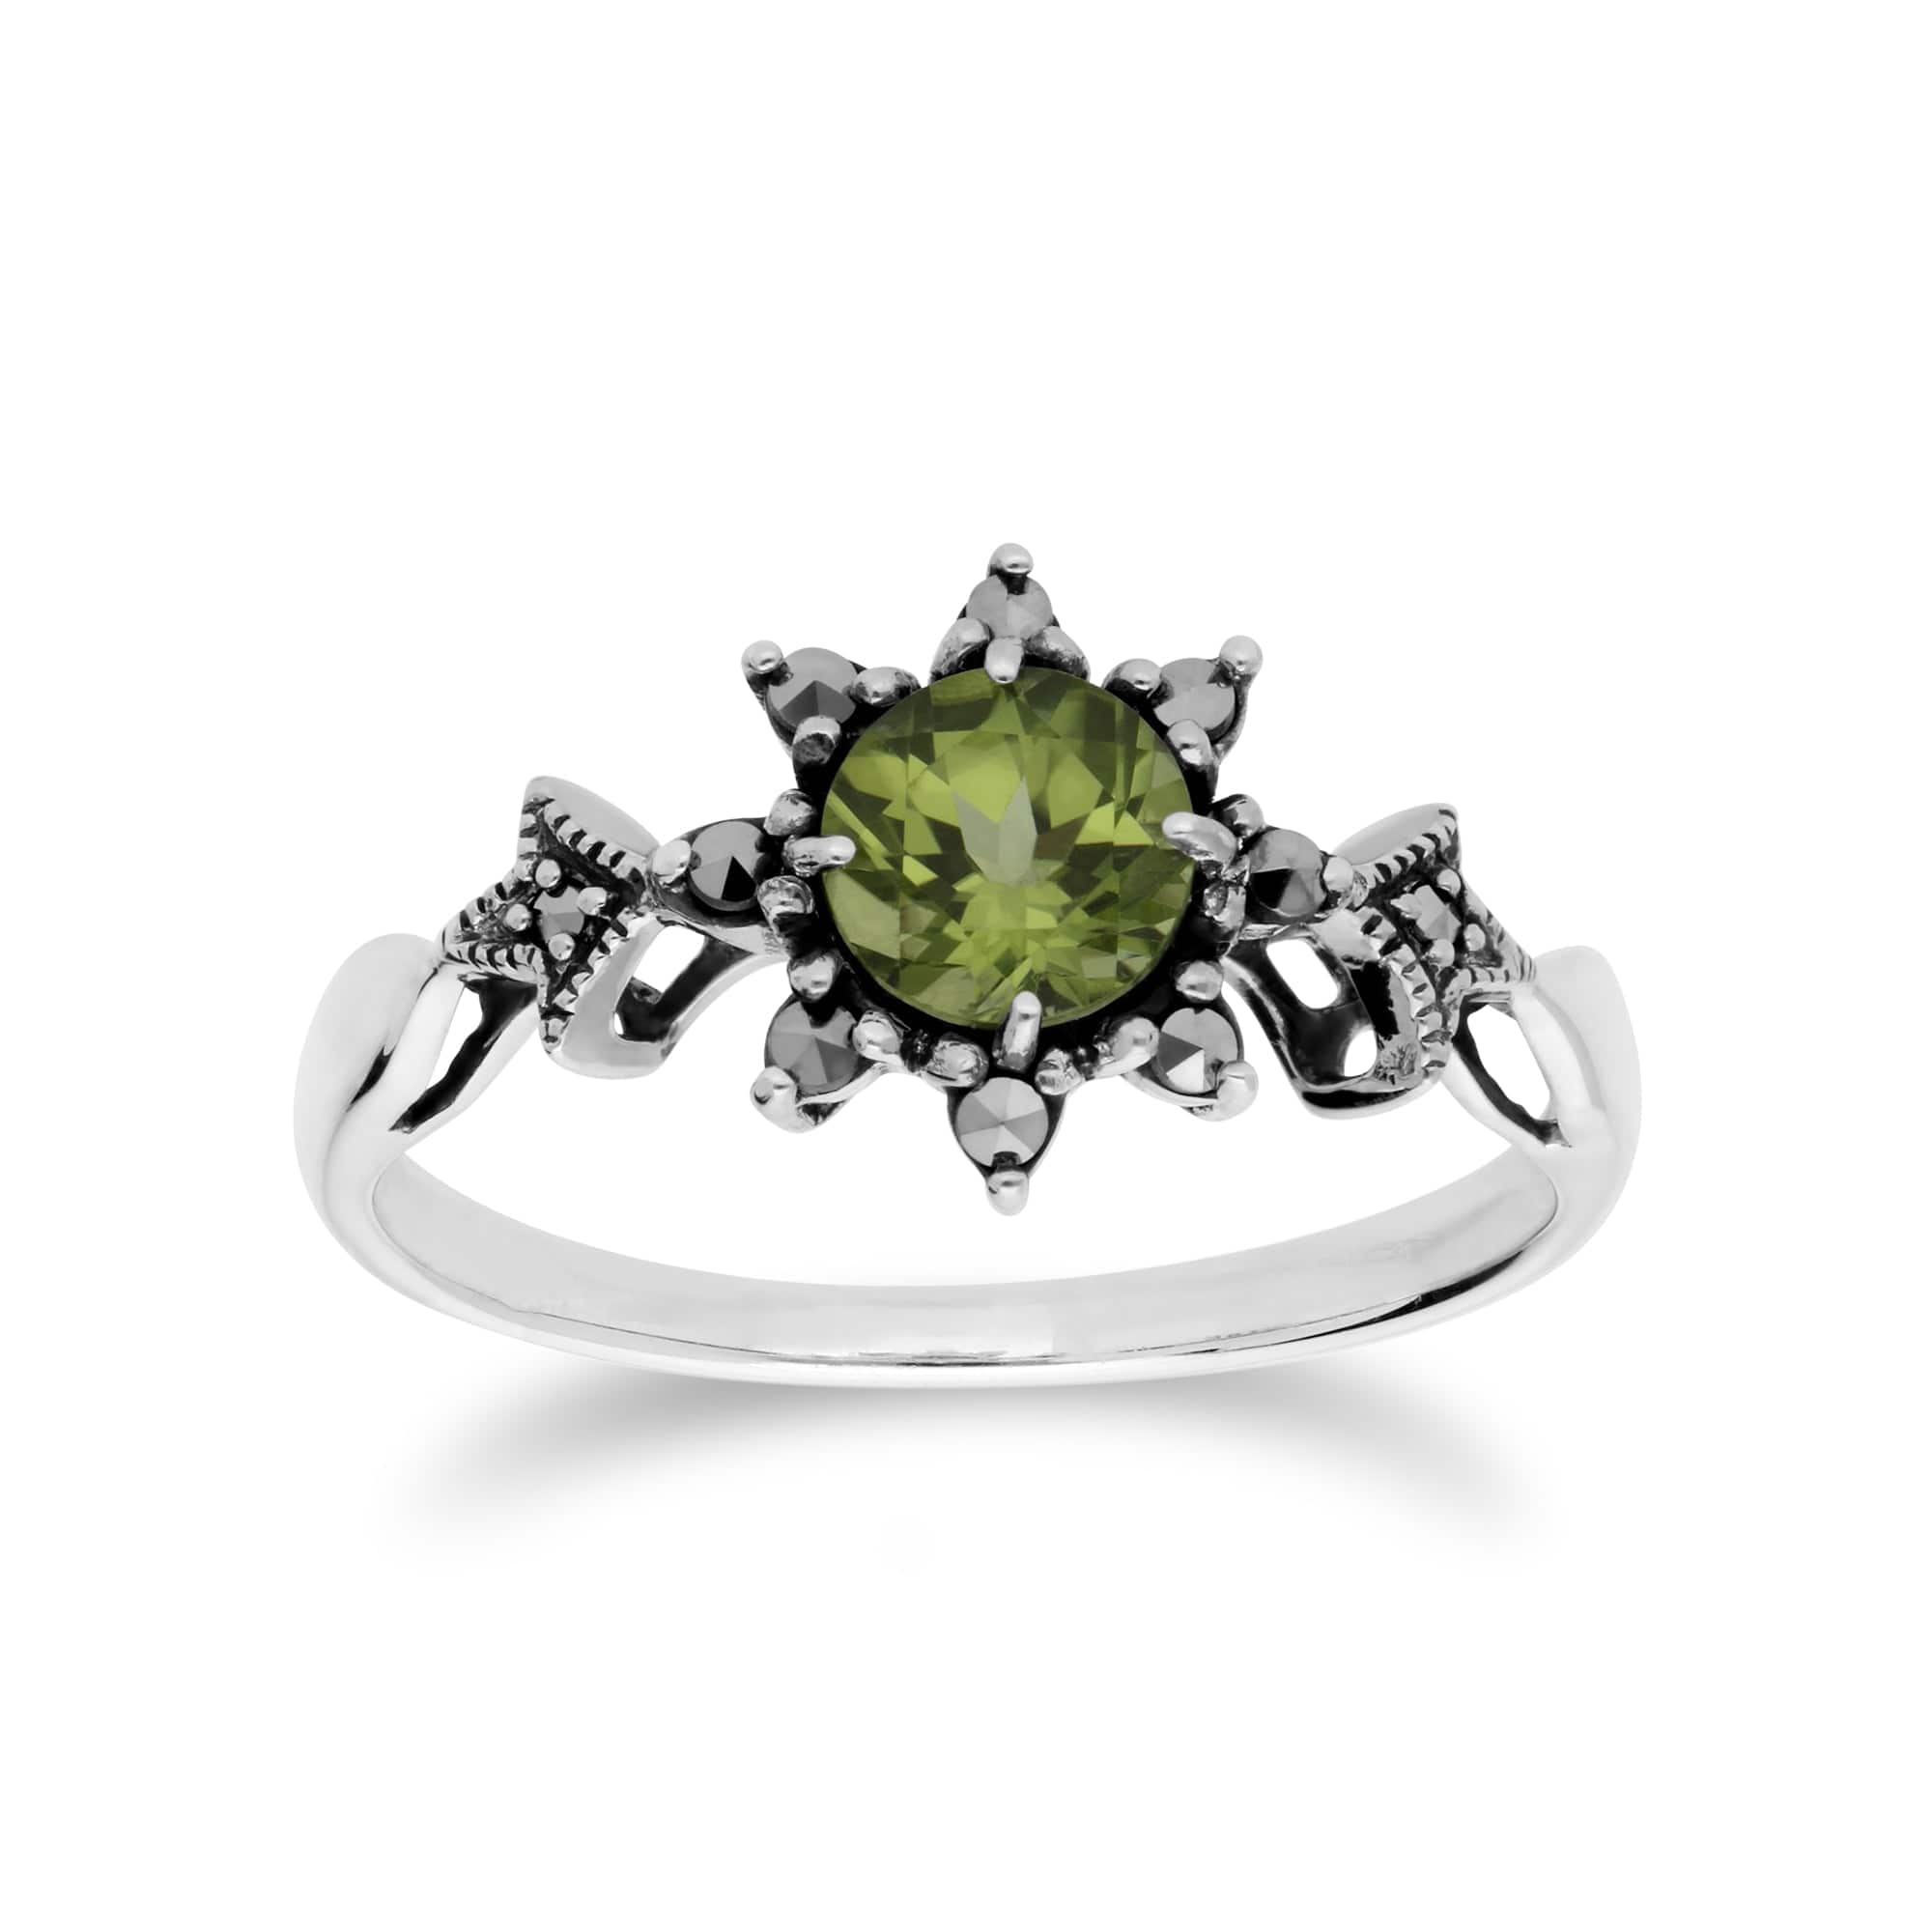 214R599504925 Art Deco Style Round Peridot & Marcasite Floral Ring in 925 Sterling Silver 1